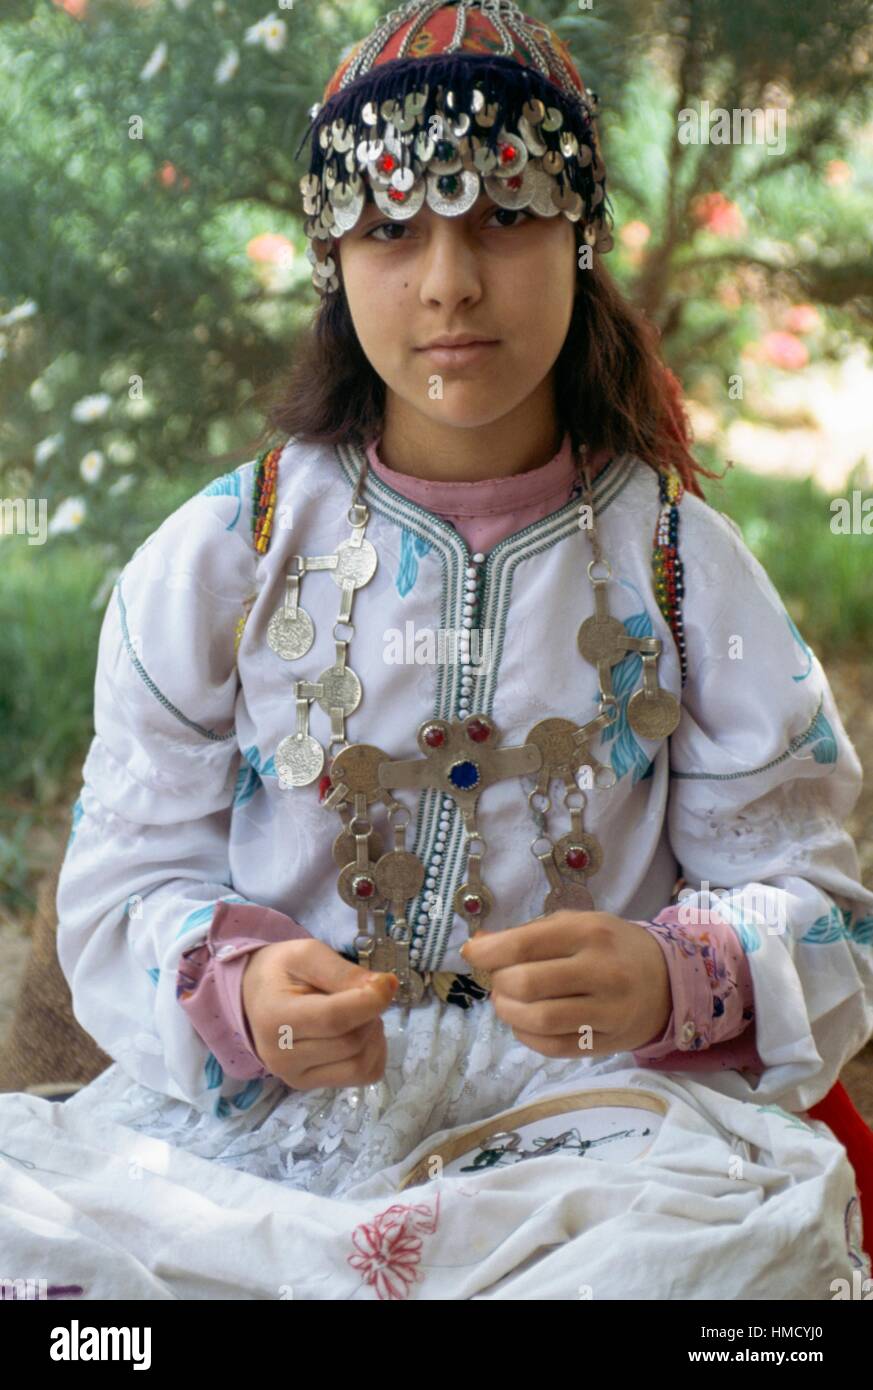 Young girl wearing a traditional costume, Marrakech, Morocco Stock Photo -  Alamy